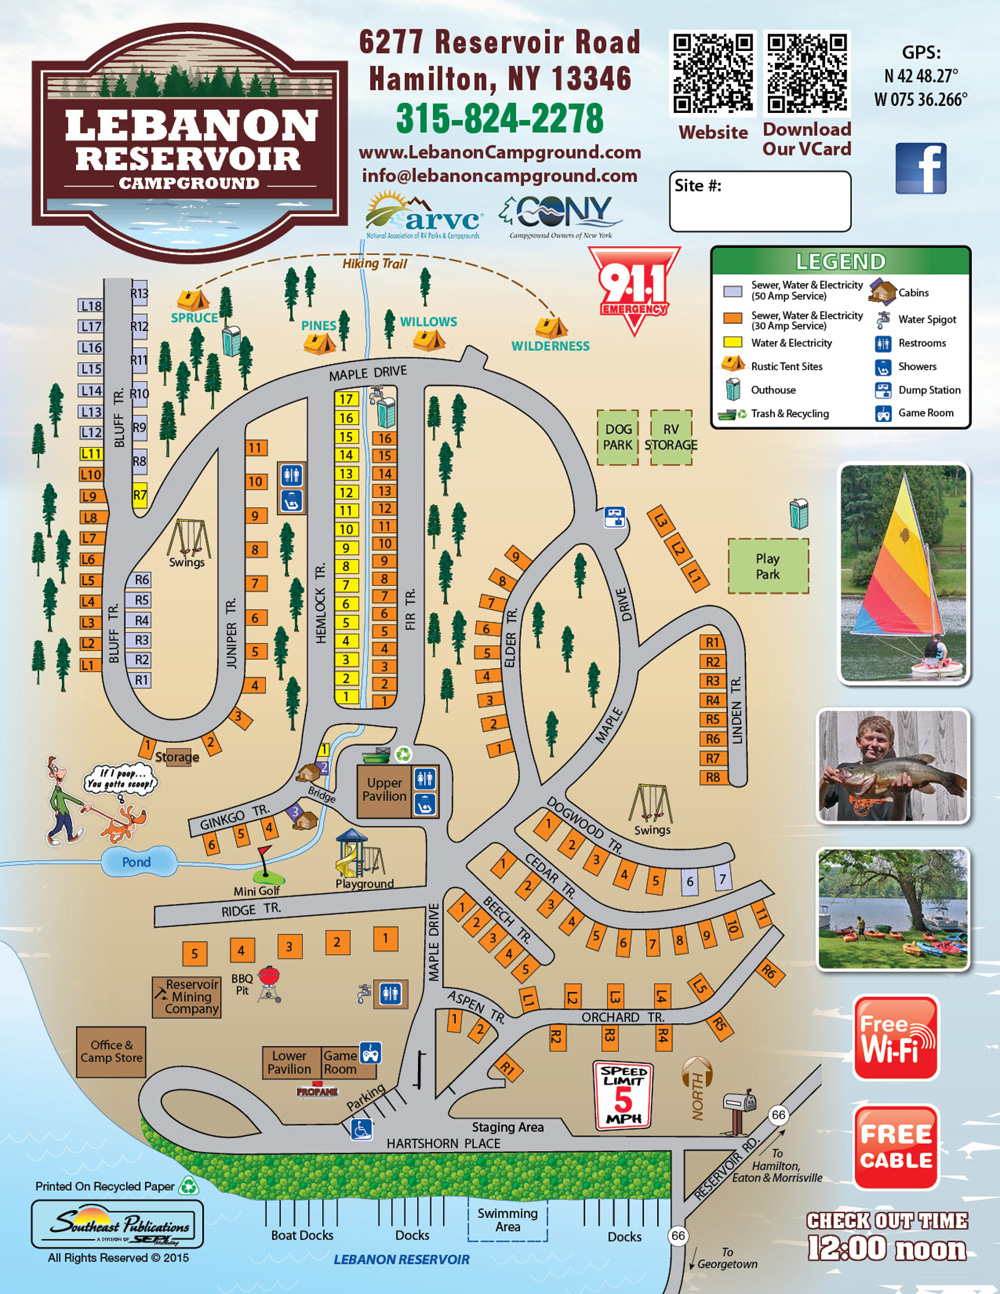 Lebanon Reservoir Campground site map